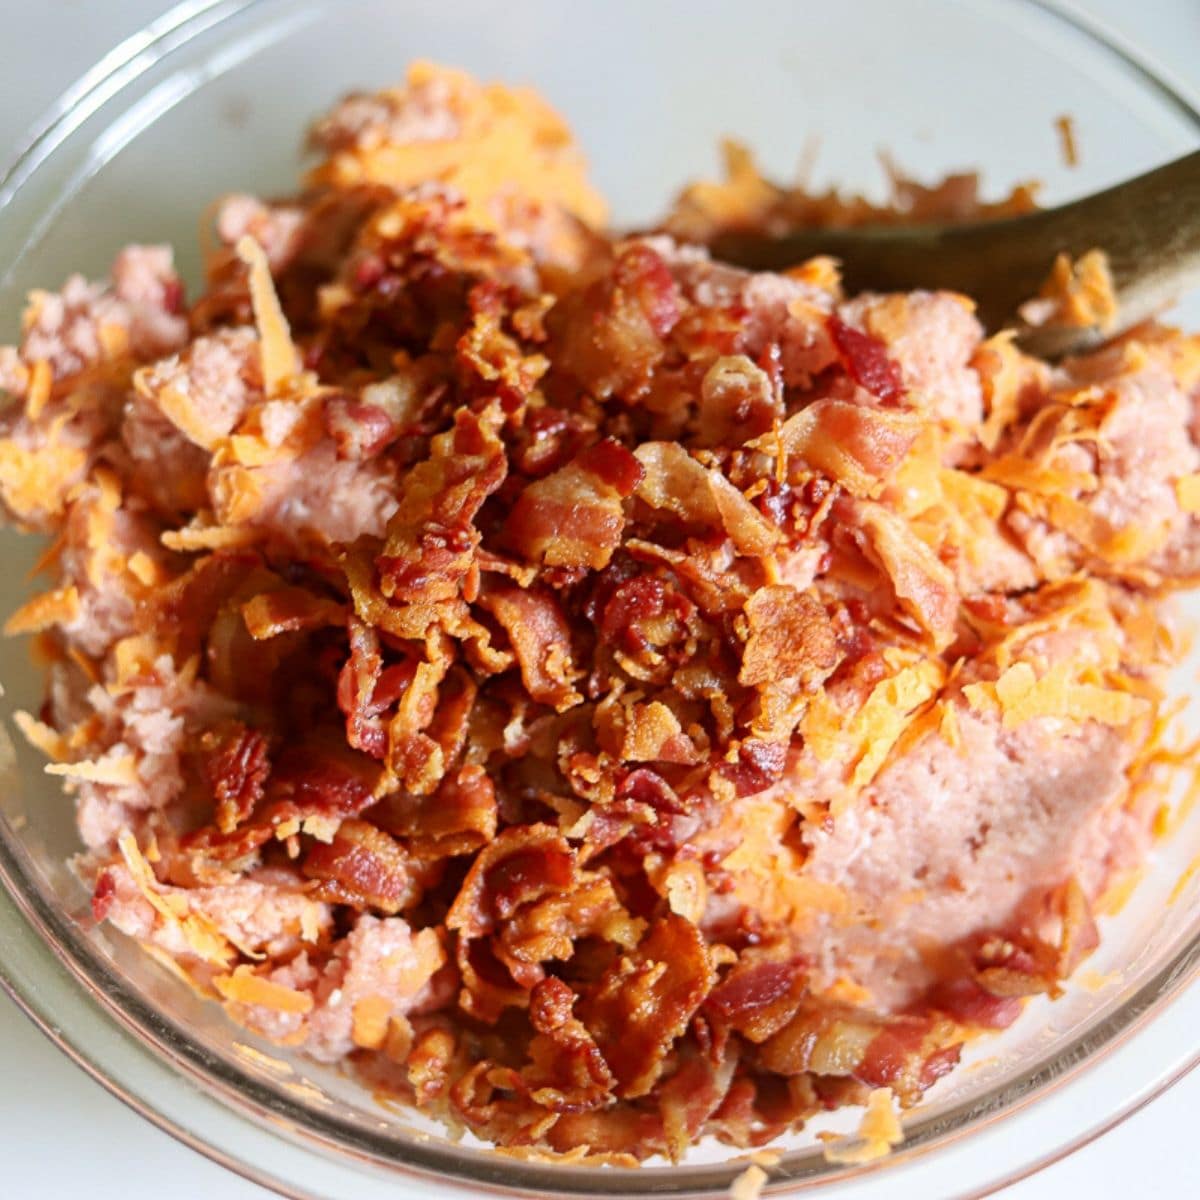 a bowl full of ground turkey, shredded sweet potato, and bacon crumbles.